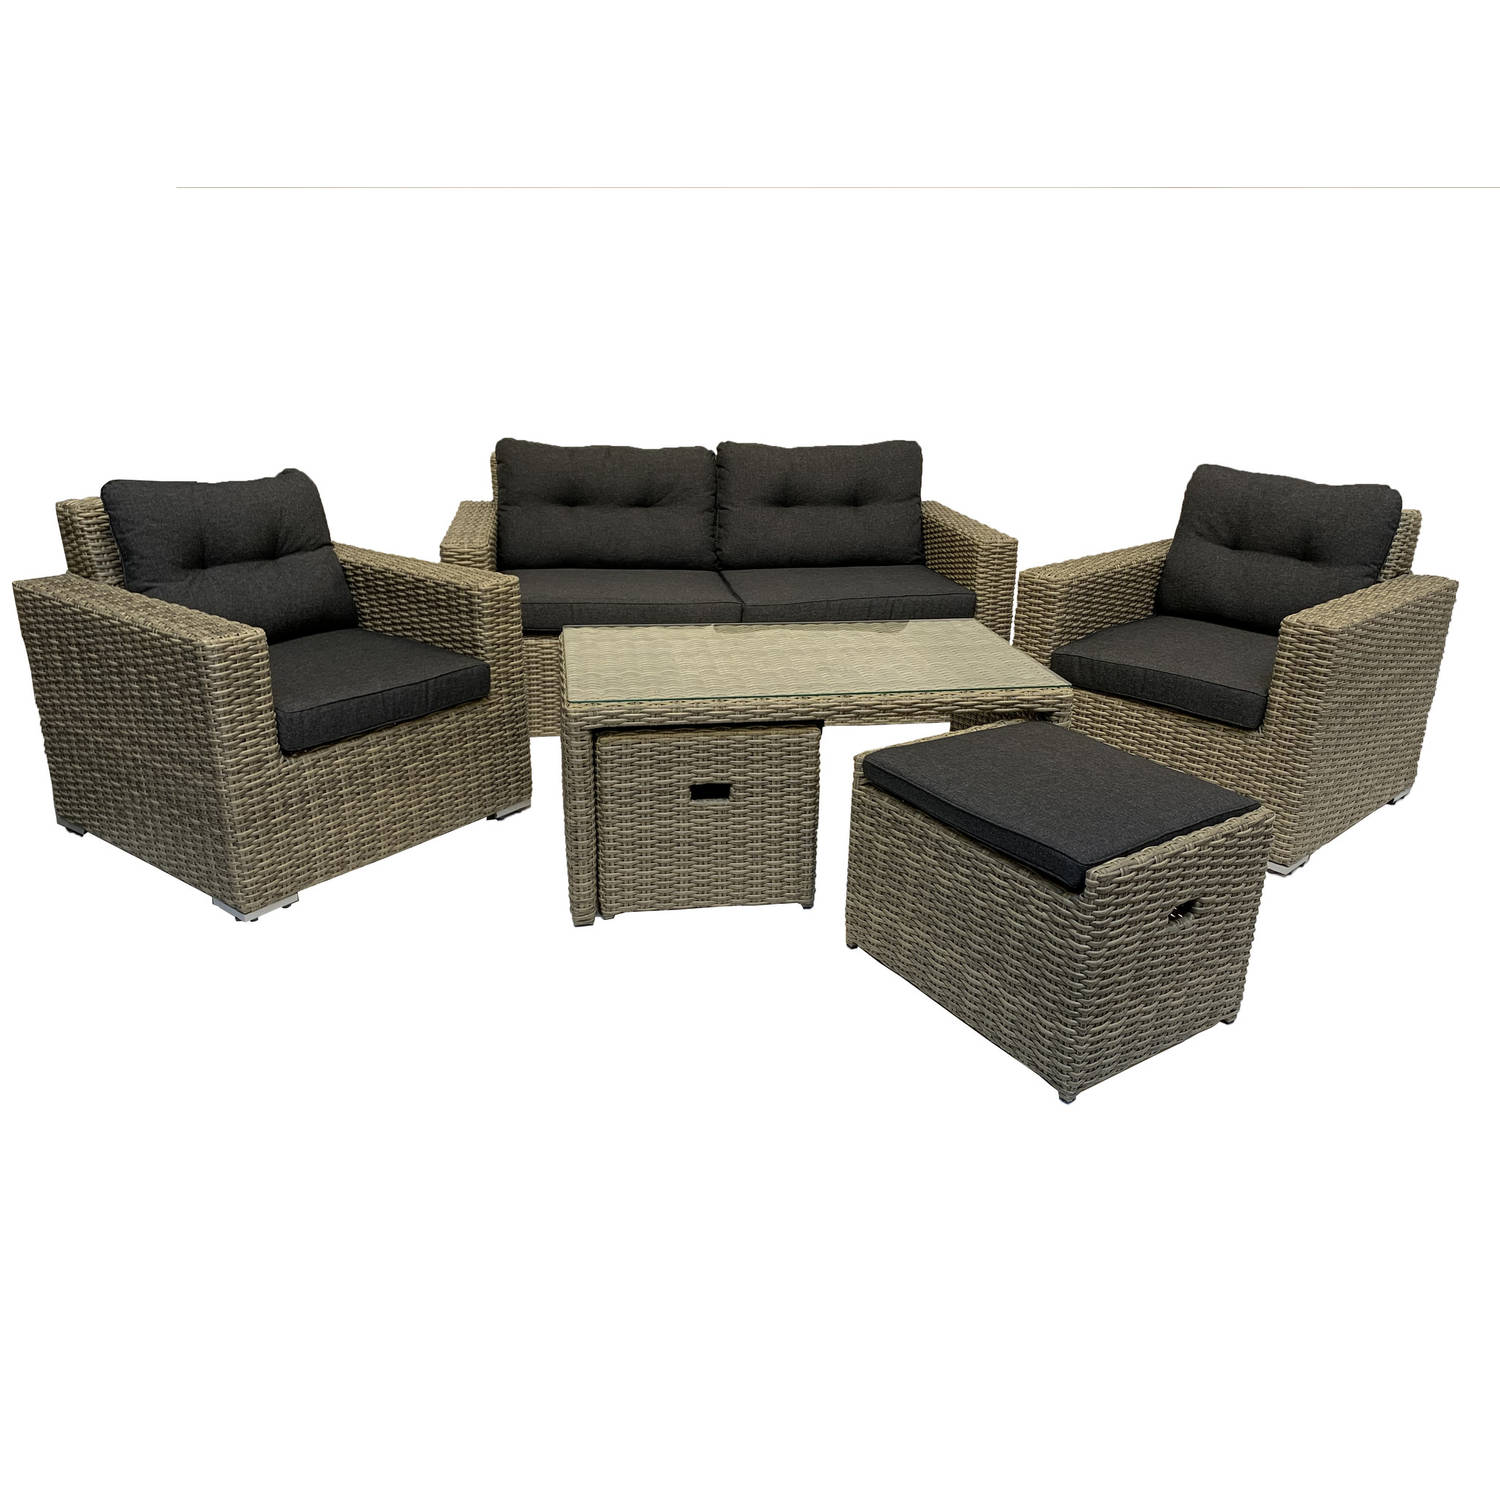 6-persoons Loungeset Garonne Forest Grey Incl. tafel